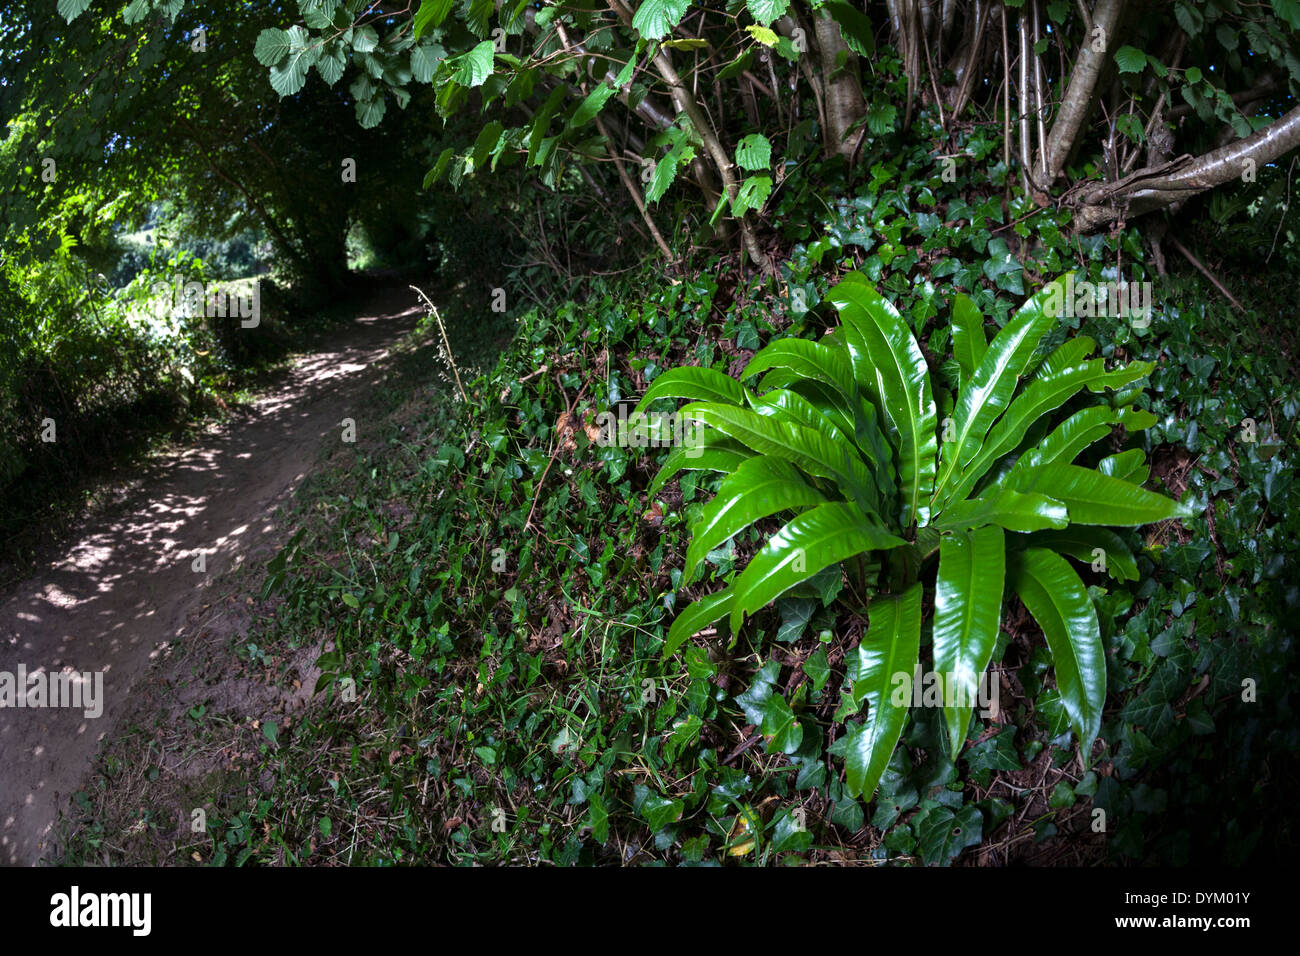 The hart's-tongue fern (Asplenium scolopendrium), seen at the bend in the forest path (Brittany - France). Harts tongue fern Stock Photo